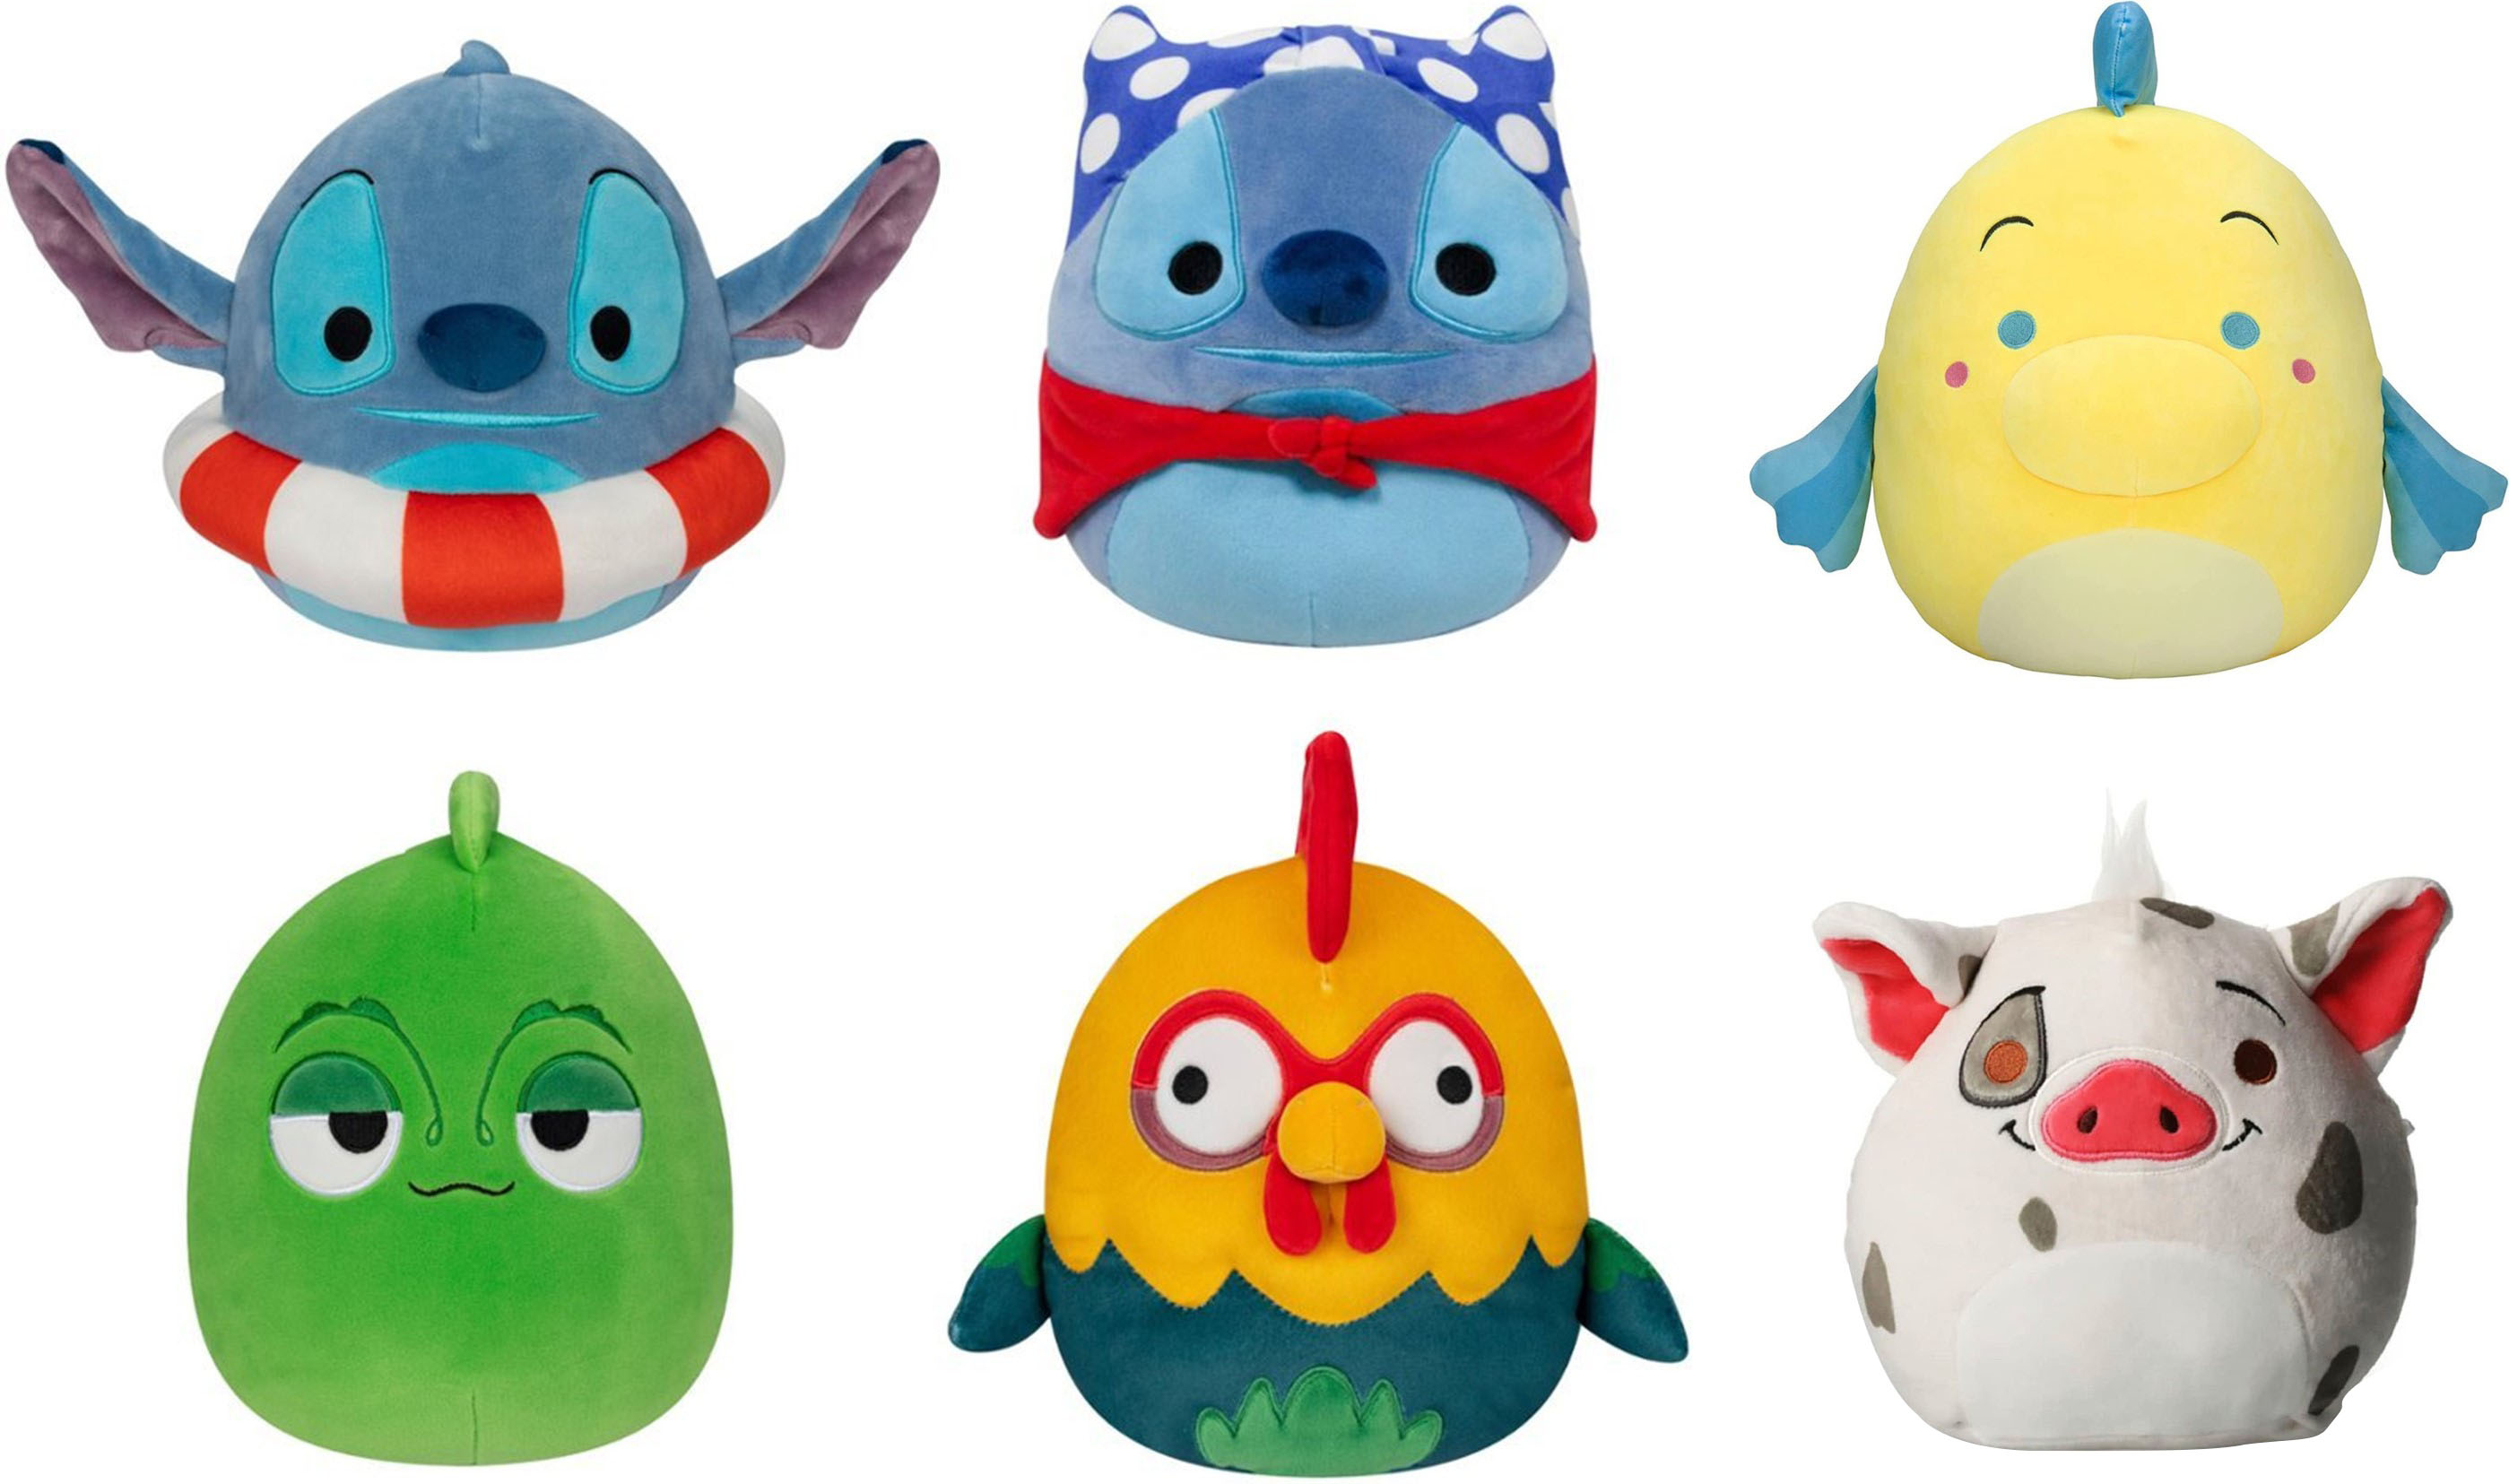 Series 1 Small Plush - Assorted